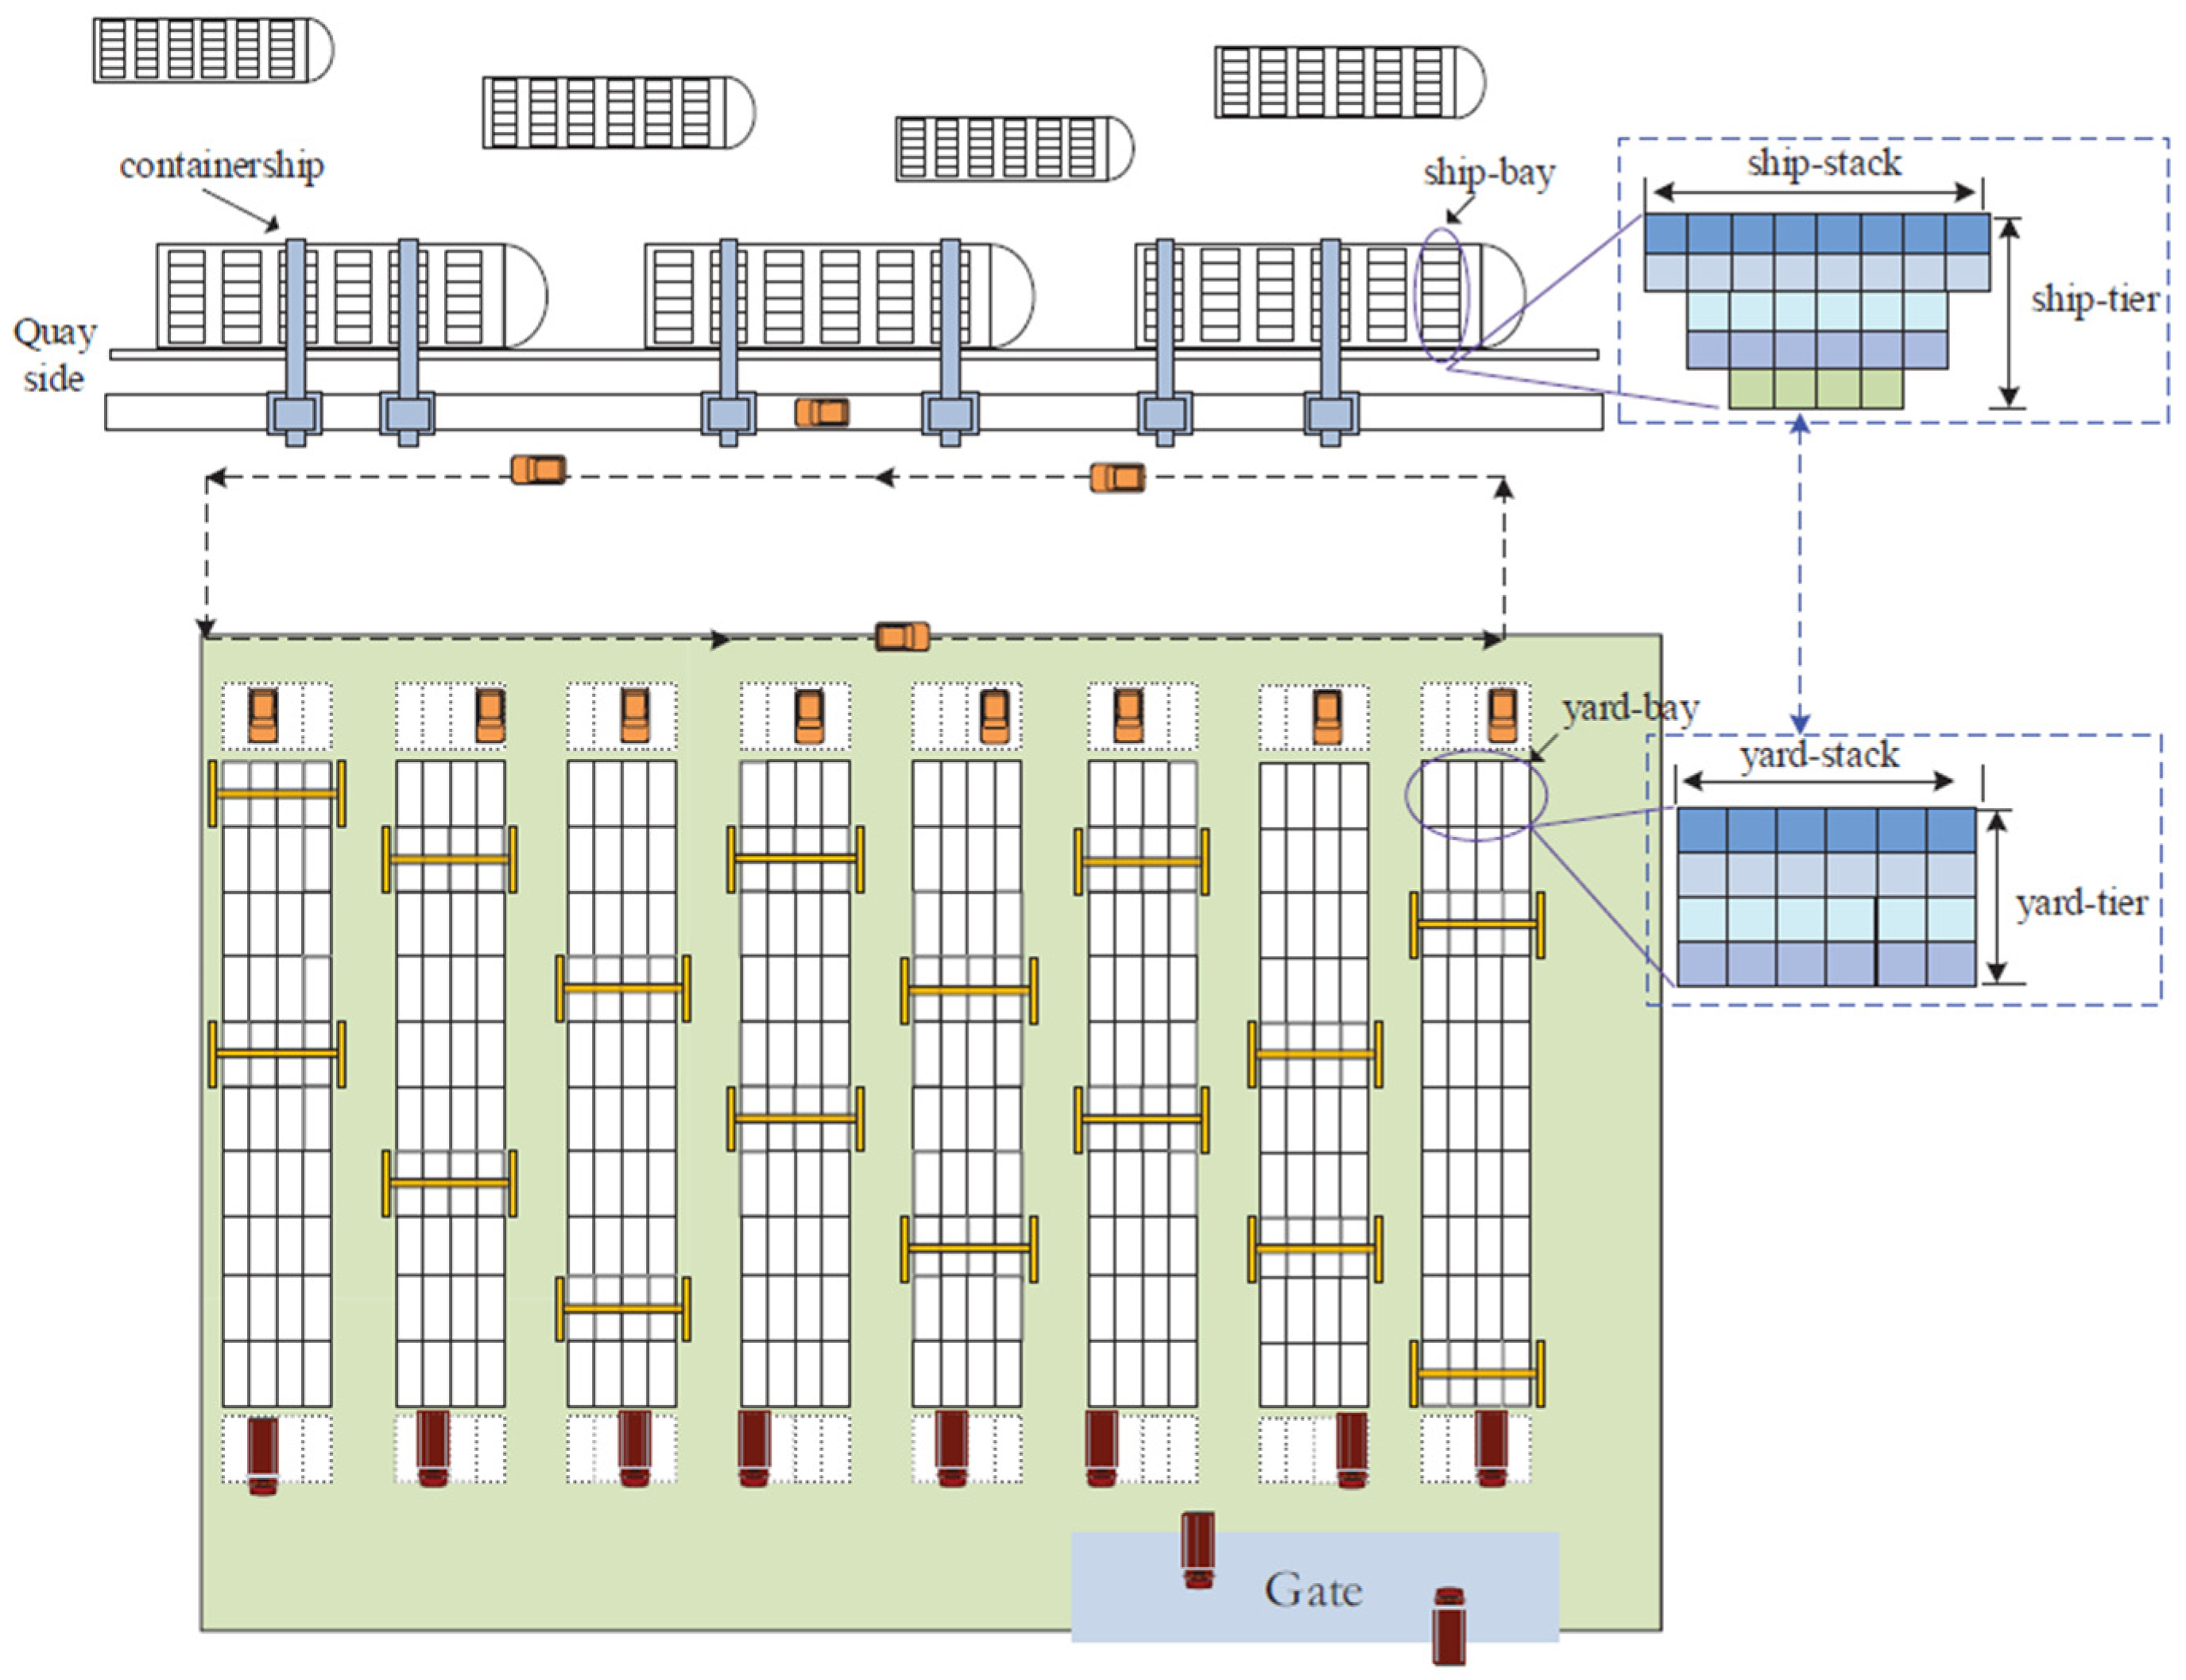 container ship loading plan